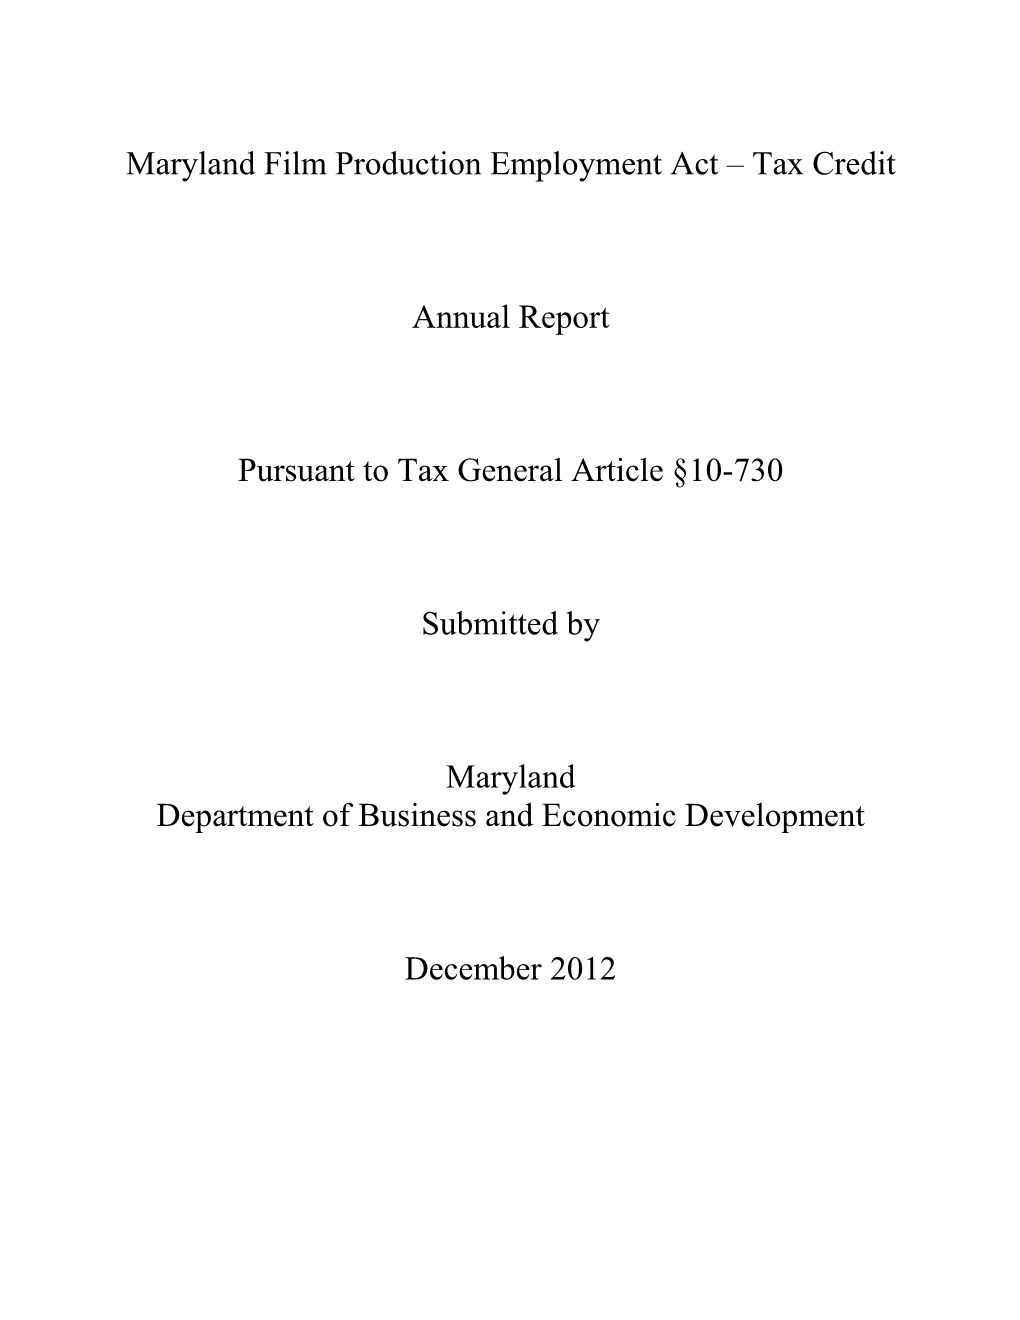 Film Production Employment Act Tax Credit Report